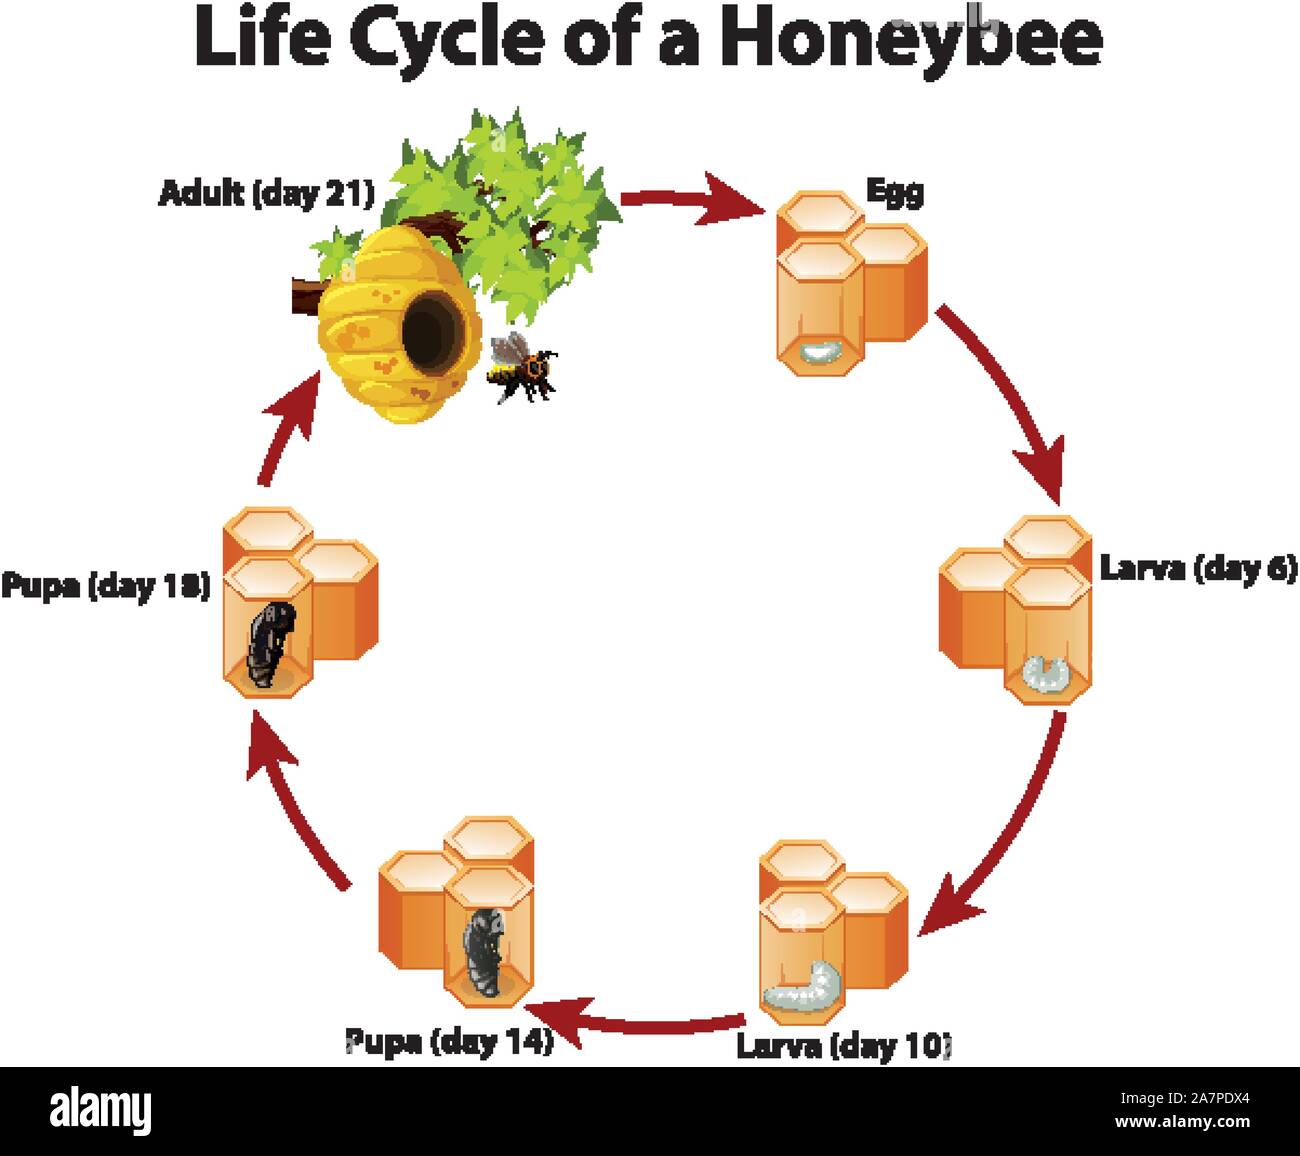 Diagram showing life cycle of honeybee illustration Stock Vector